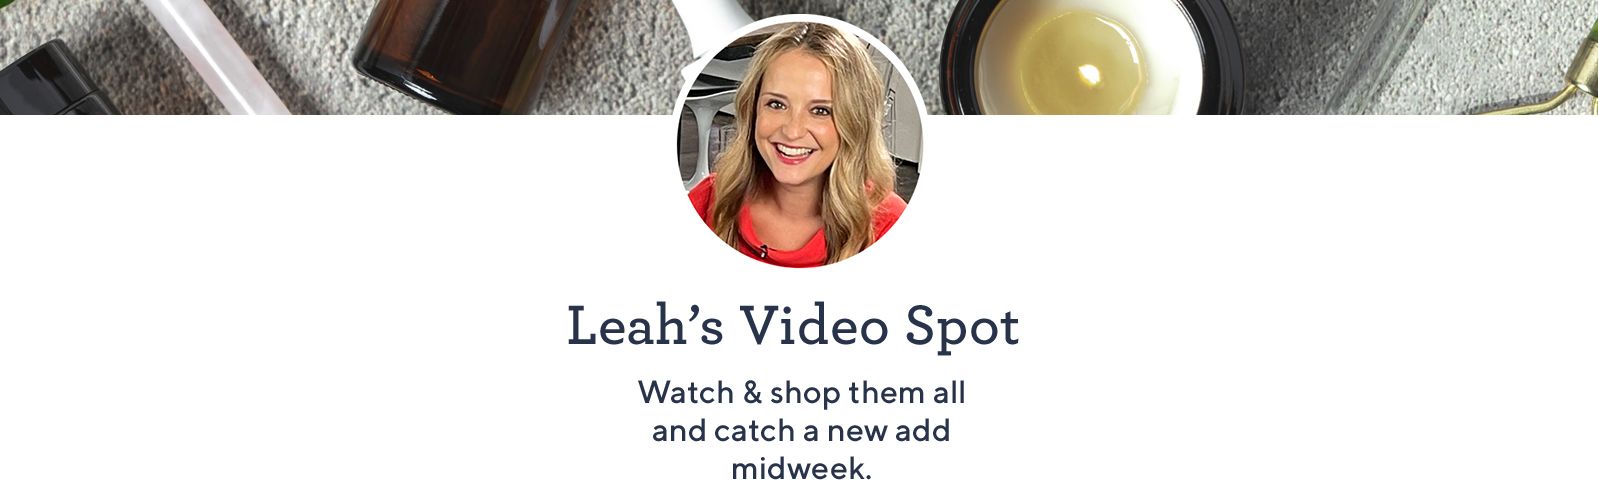 Leah's Video Spot. Watch & shop them all and catch a new add midweek.